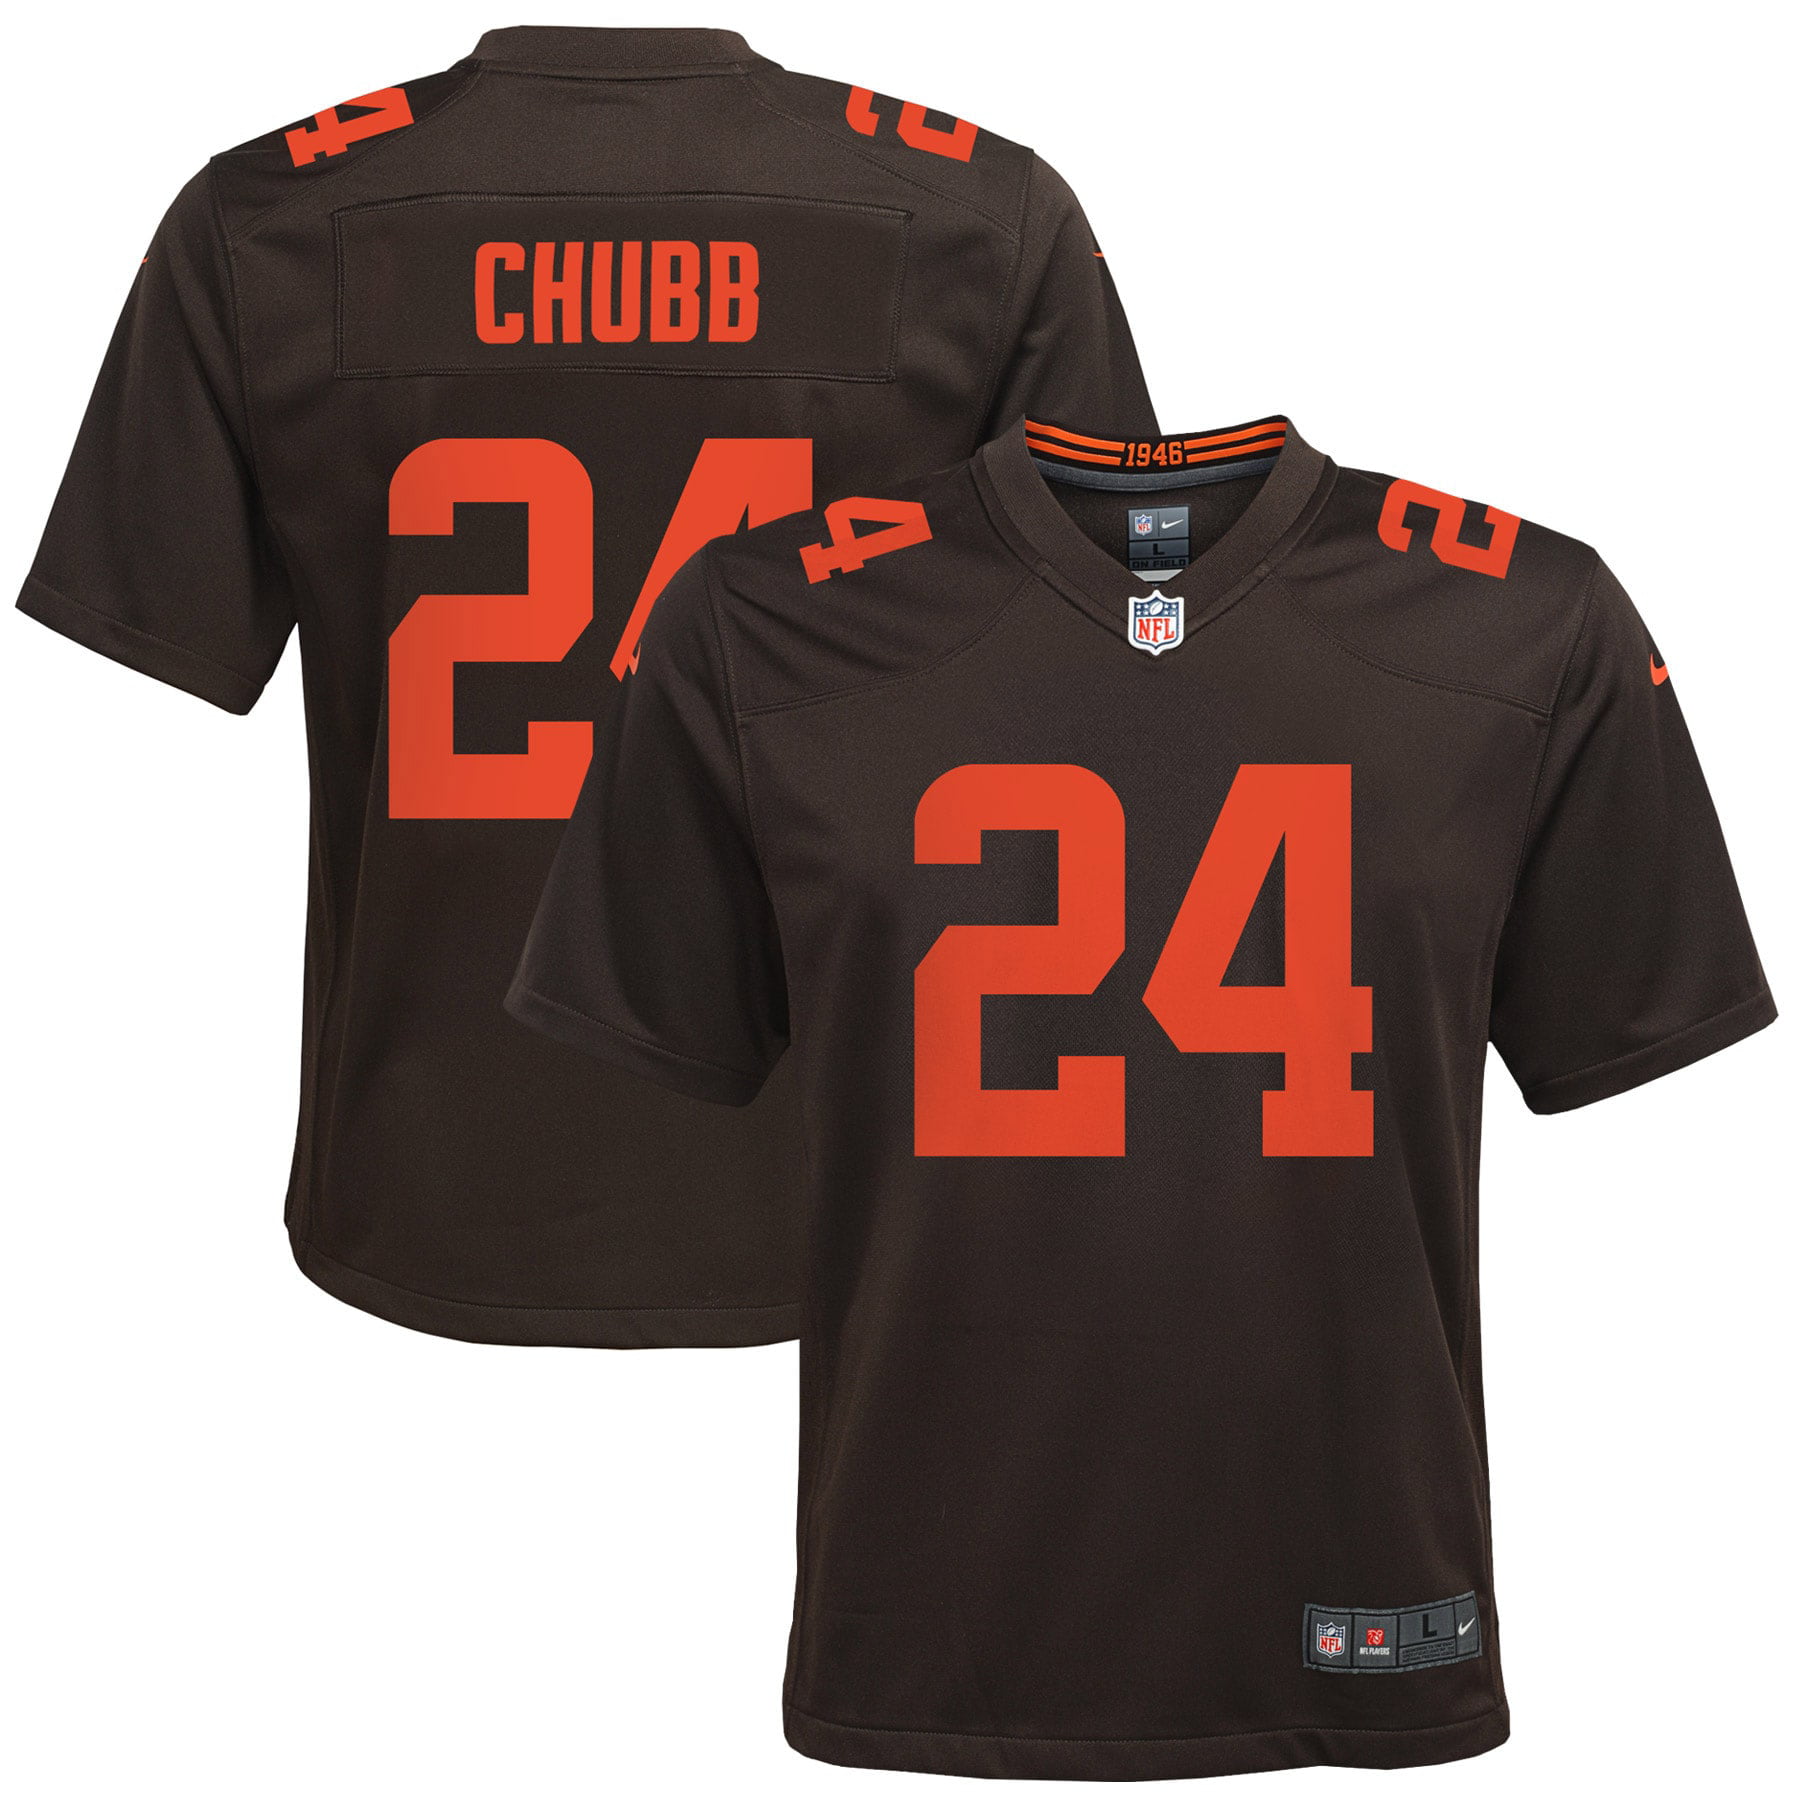 Nick Chubb Cleveland Browns Nike Youth Alternate Game Jersey - Brown ...